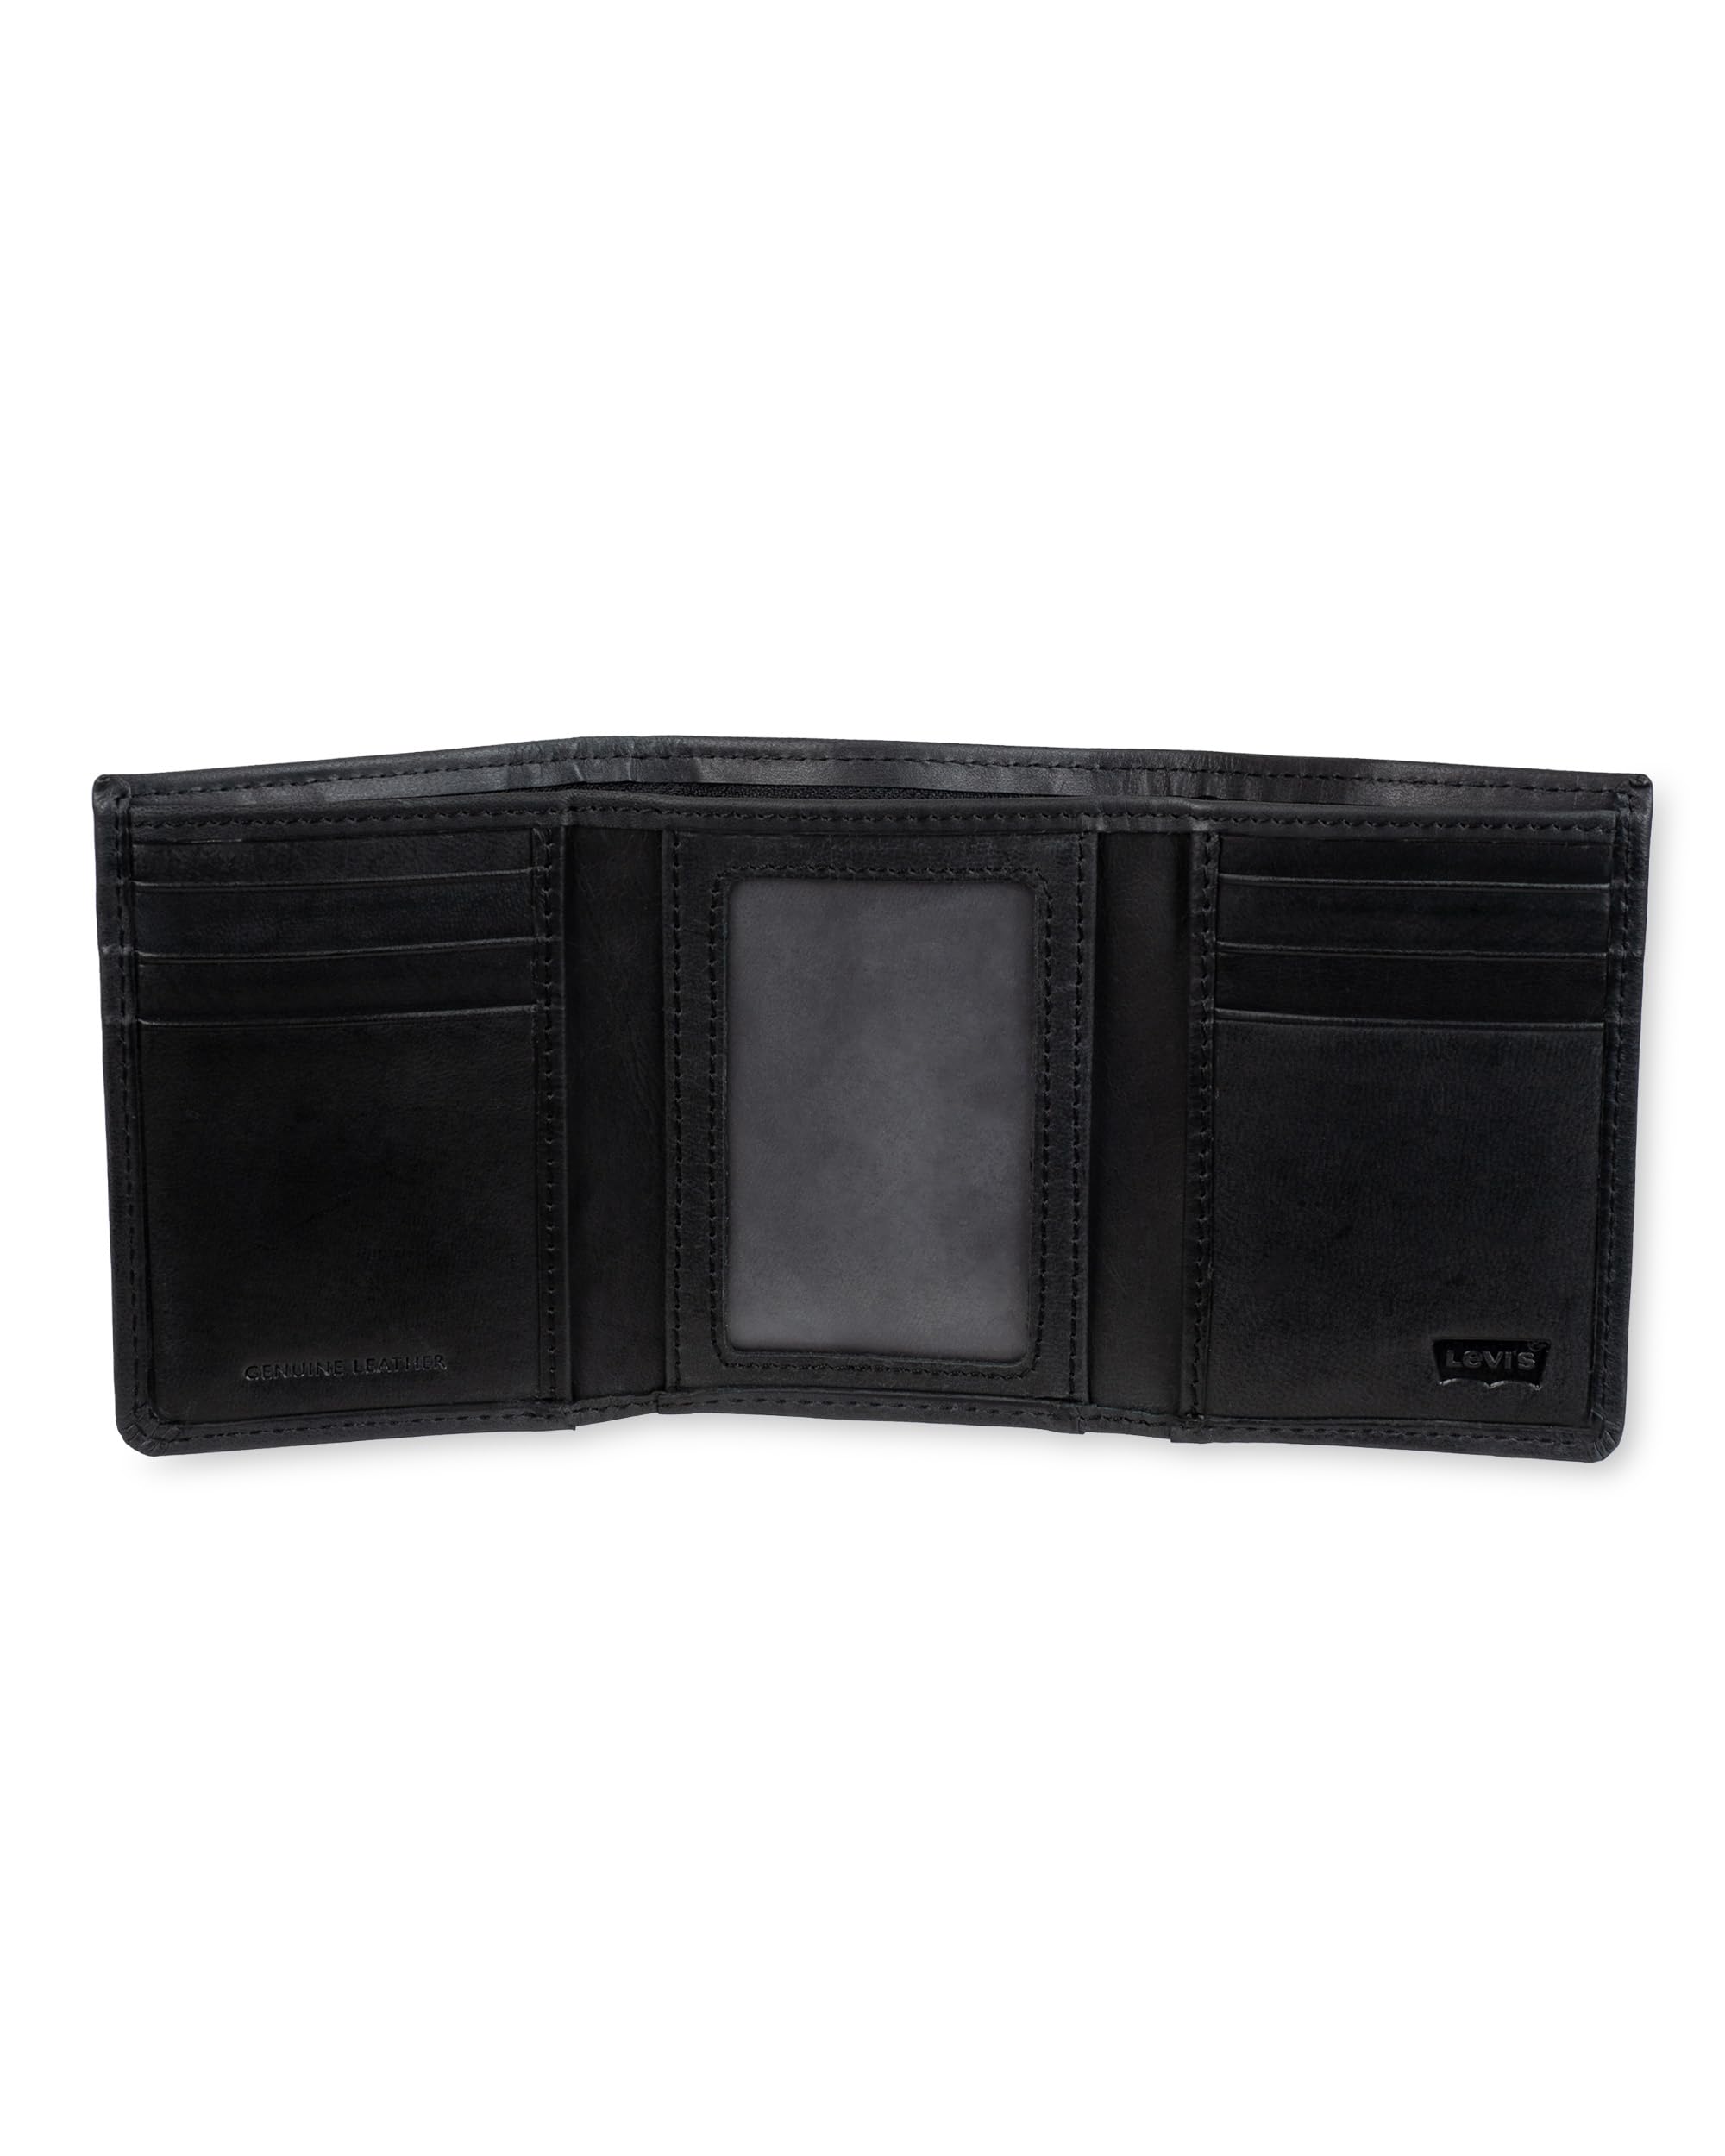 Levi's Men's Trifold Wallet-Sleek and Slim Includes Id Window and Credit Card Holder